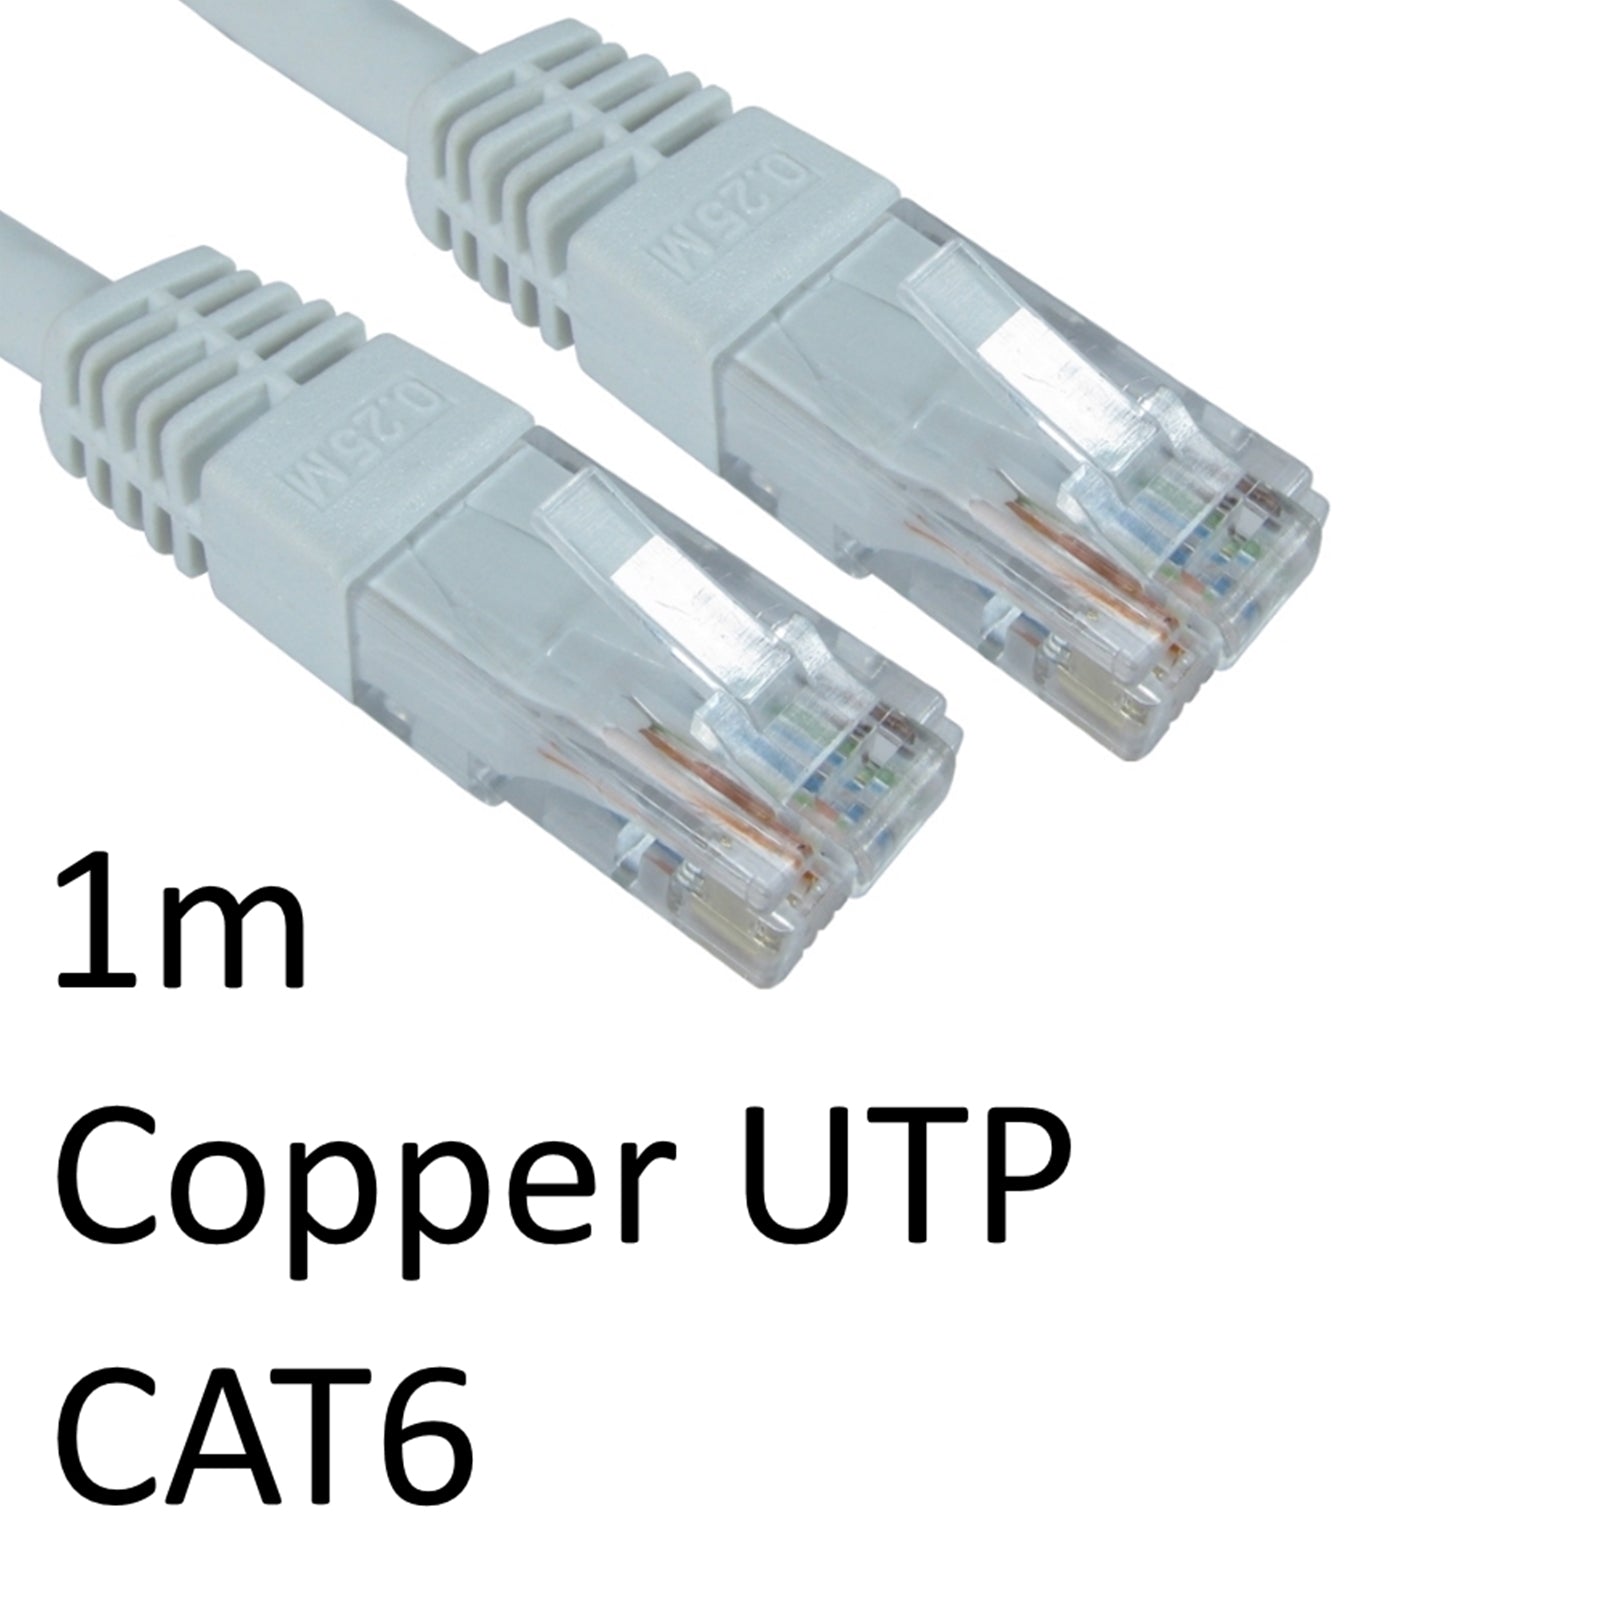 Cat6 RJ45 (M) to RJ45 (M) 1 Metre OEM Moulded Boot Copper UTP Network Cable - White